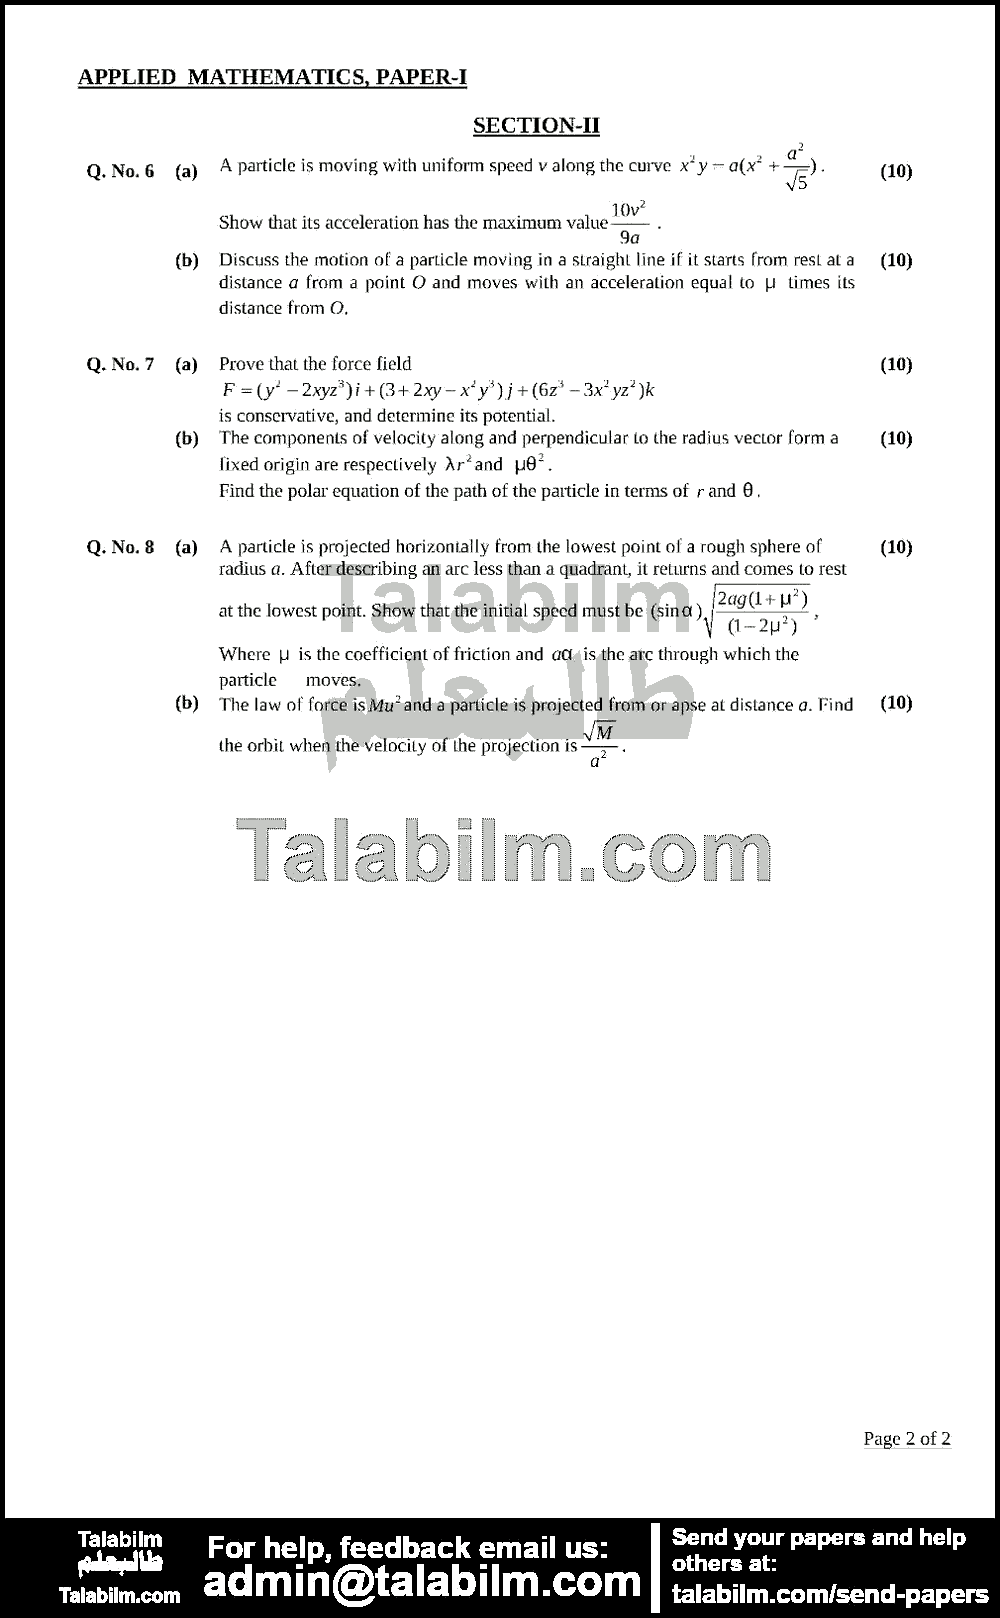 Applied Mathematics 0 past paper for 2015 Page No. 2